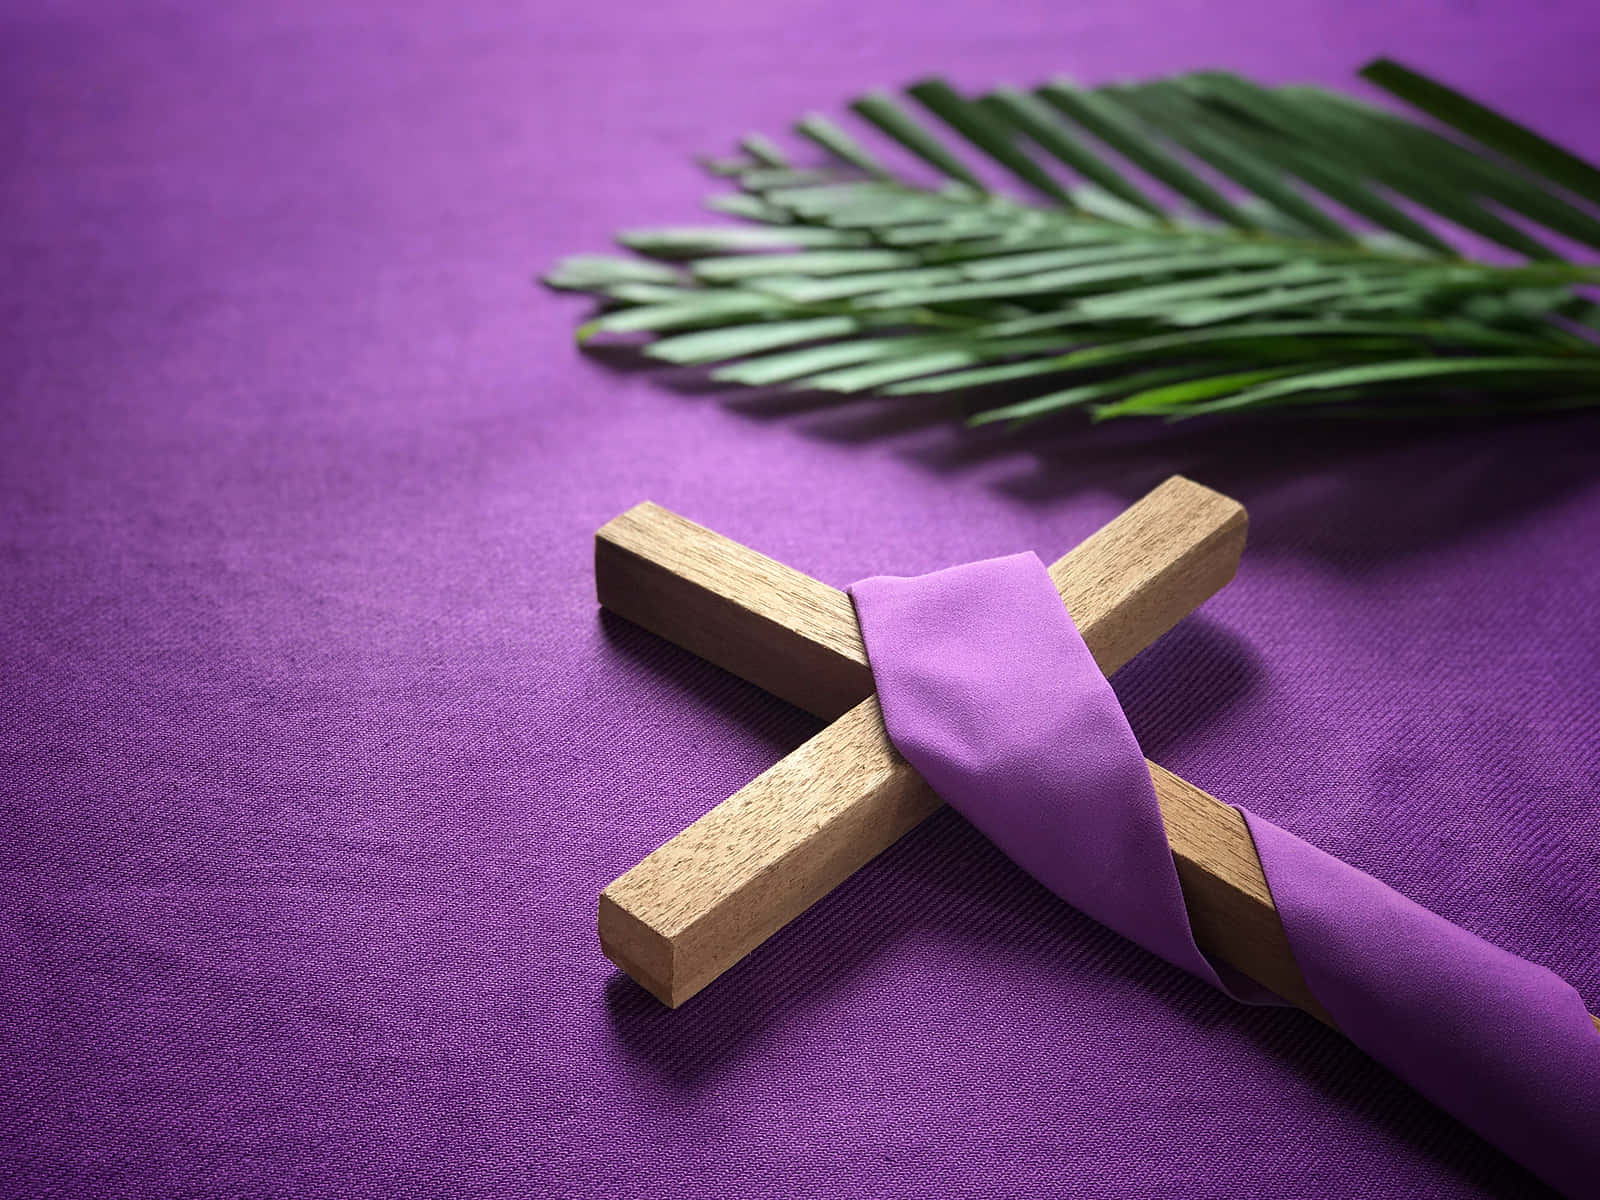 A Wooden Cross And Purple Palm Leaves On A Purple Cloth Wallpaper